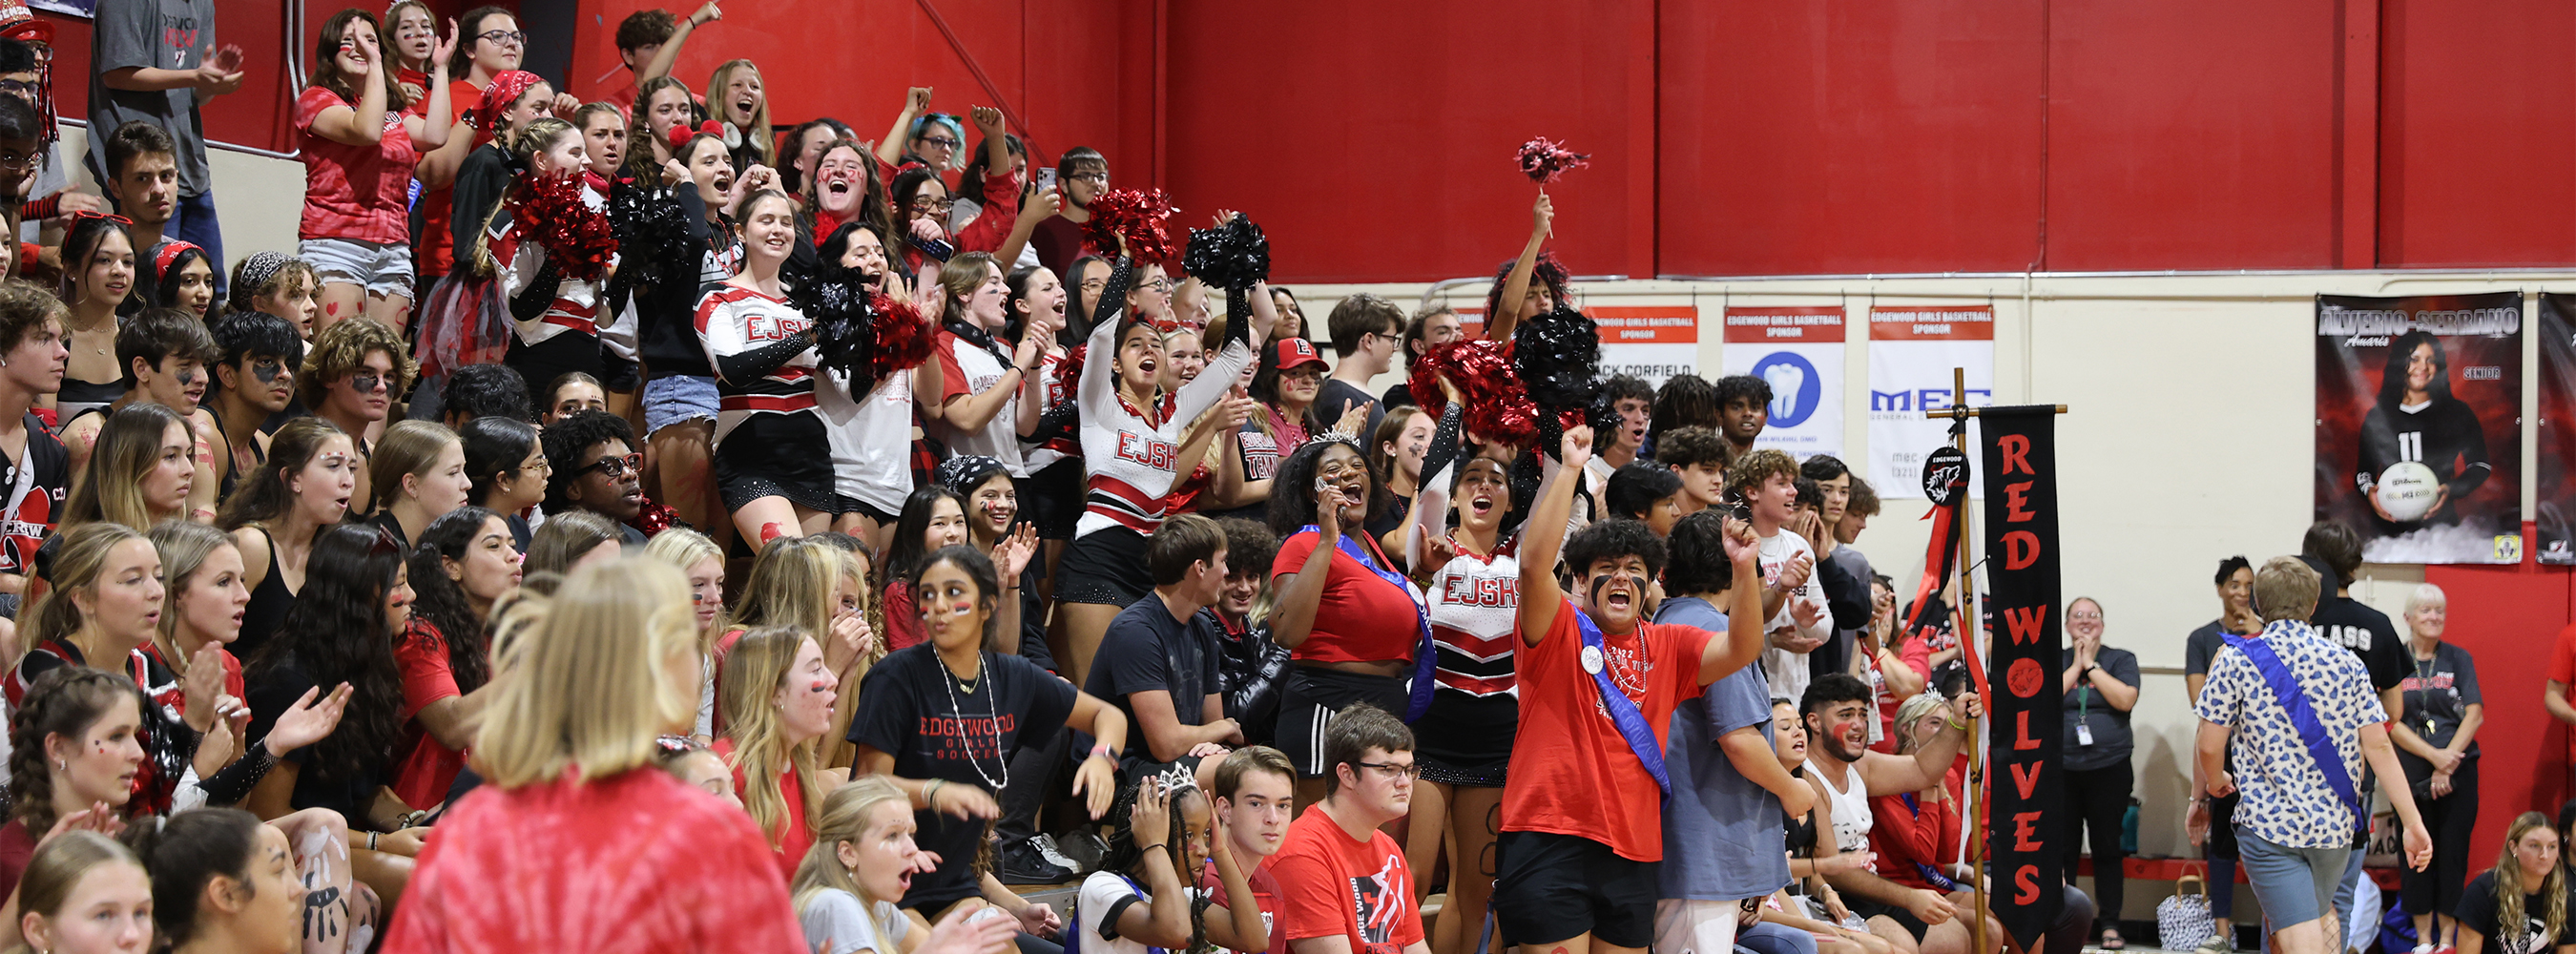 Students cheering in the gym during a pep rally